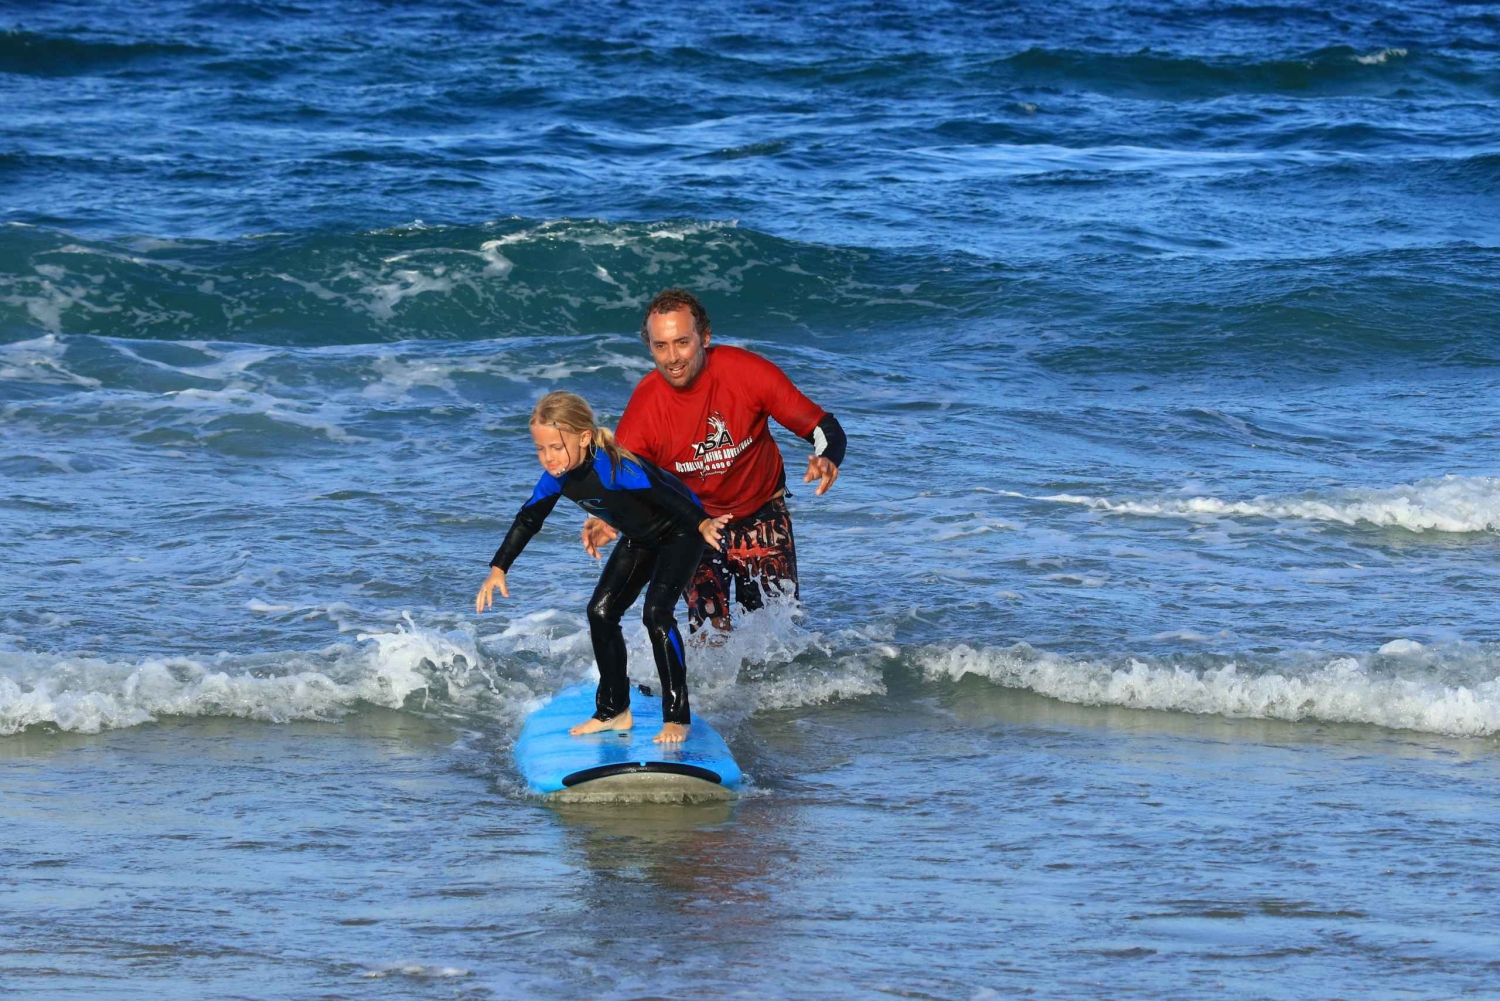 Gold Coast: 2-Hour Private Surf Lesson with Photo Package